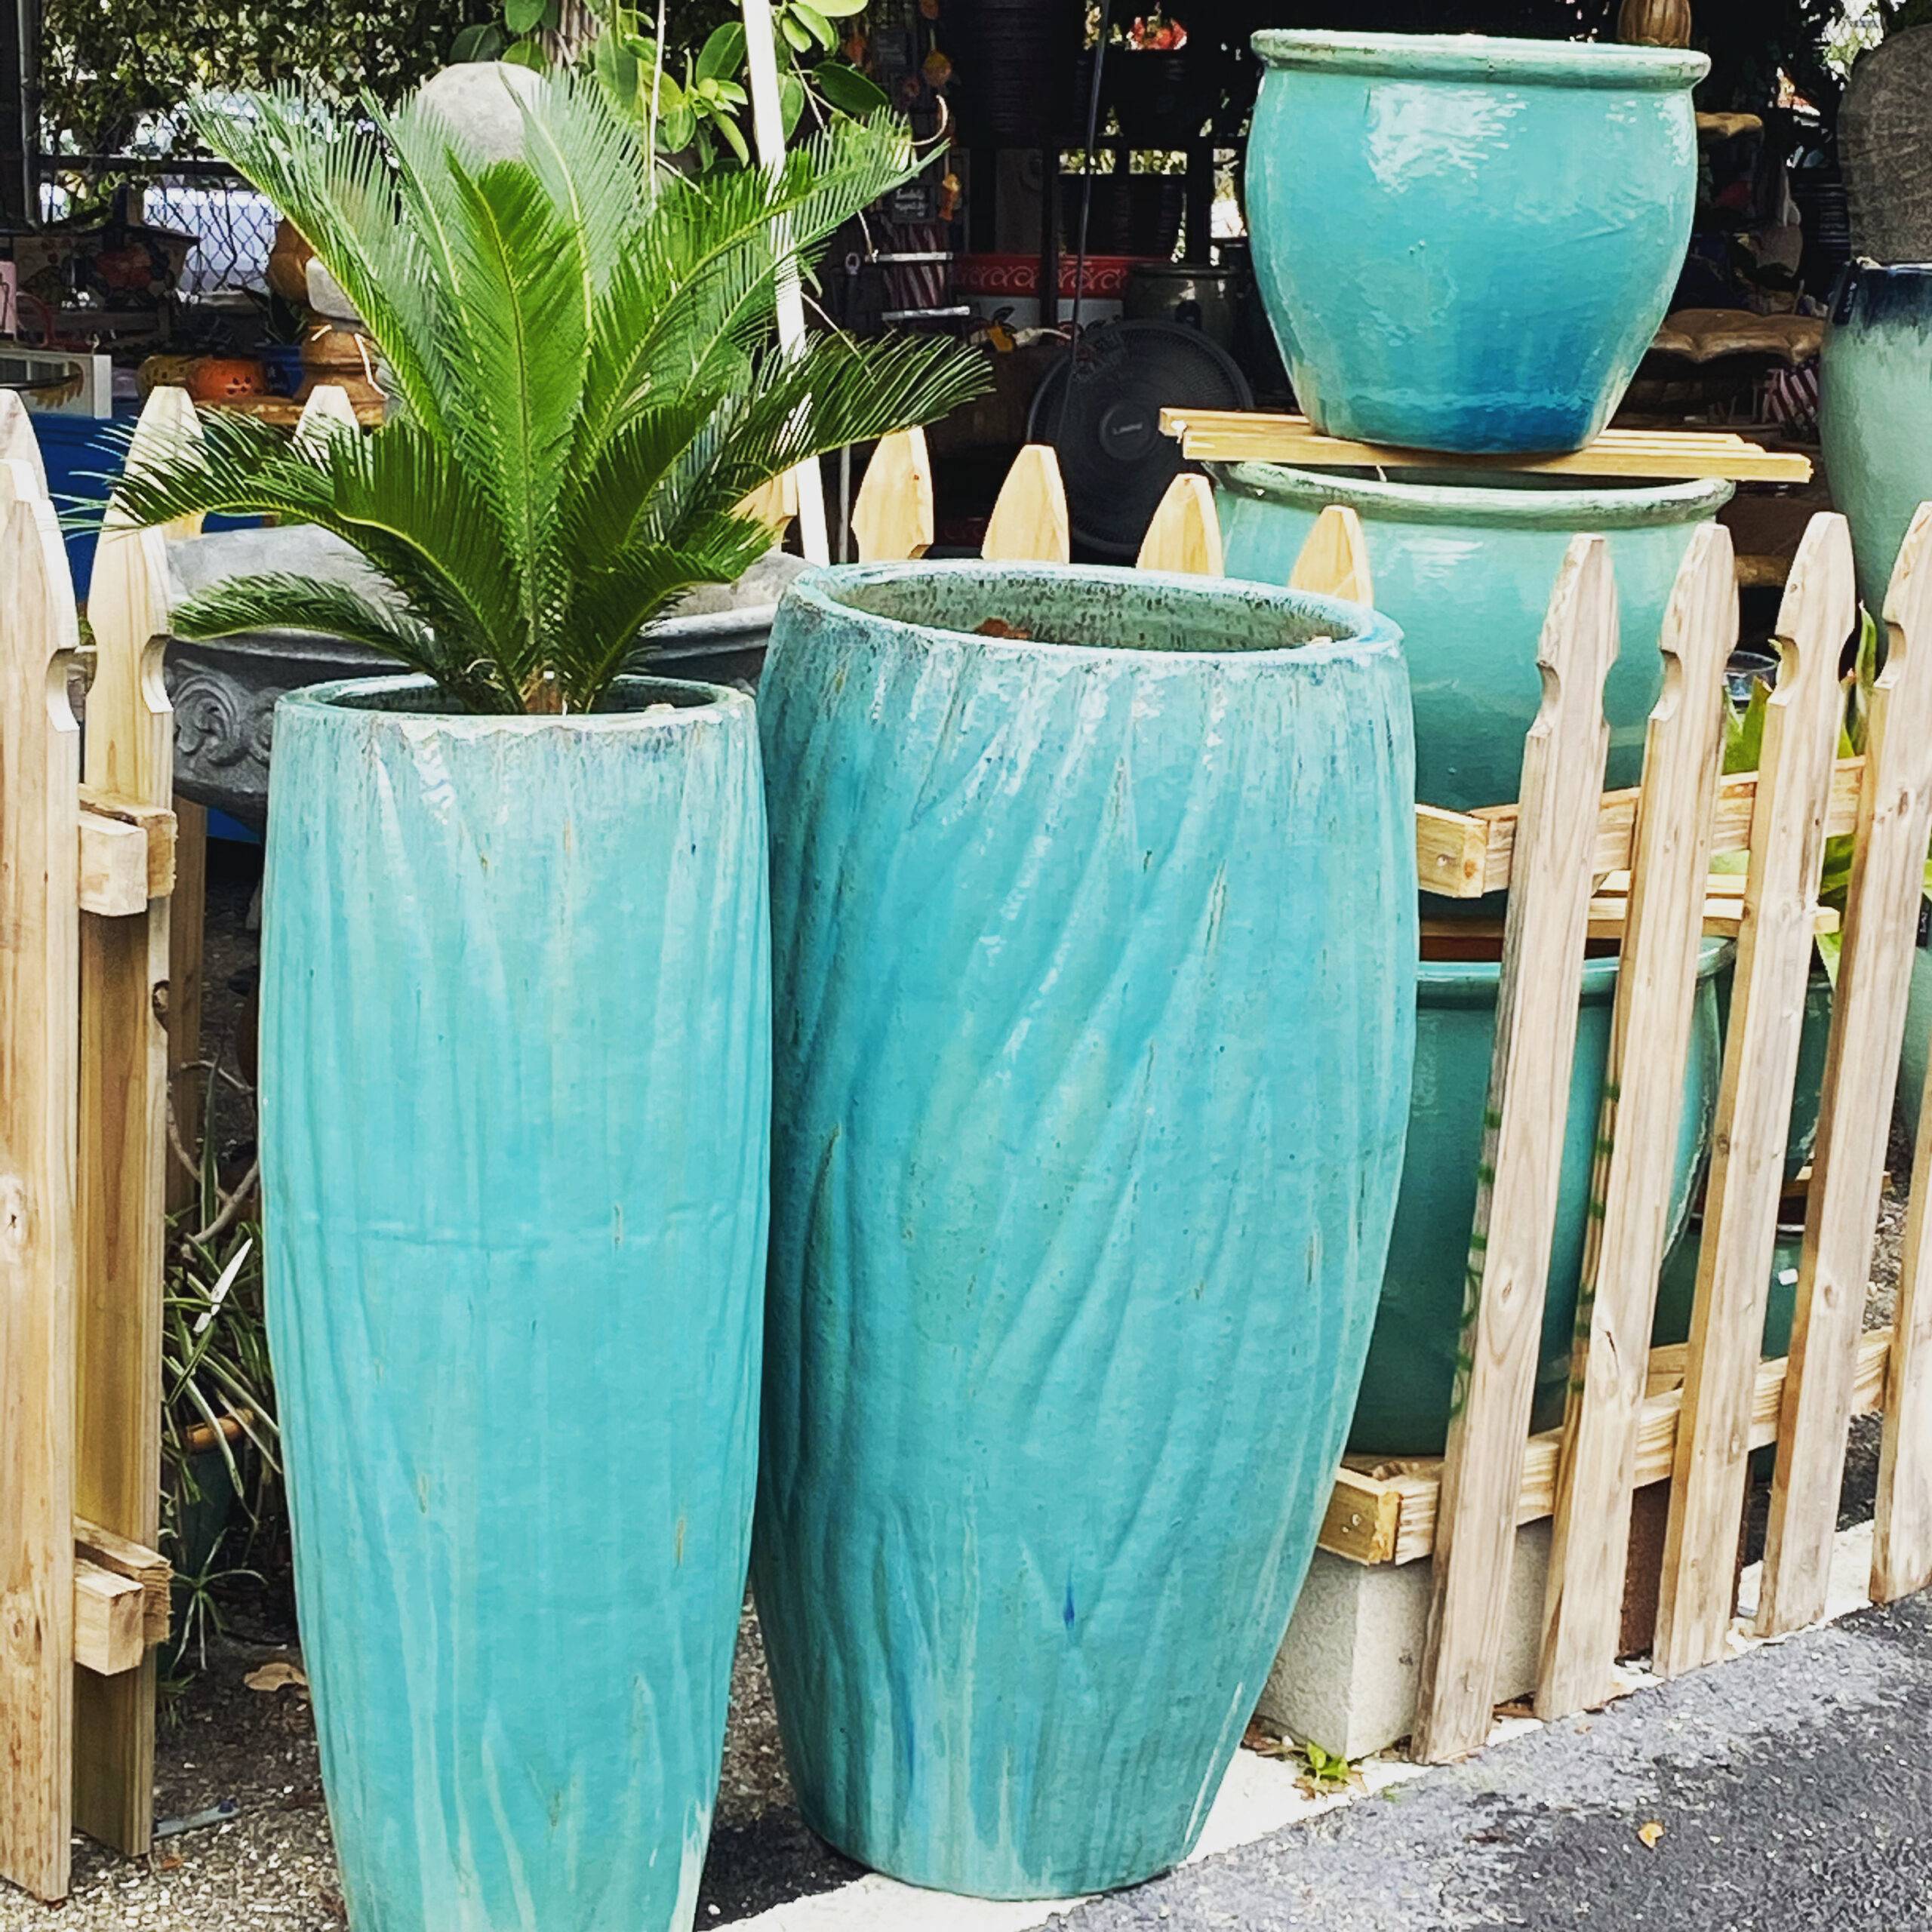 Ethans Courtyard and Patio Bonita Springs | Large Teal Glazed Ceramic Planters | Bonita Springs | Water Fountains, Wall Fountains, Mailboxes, and more | Pottery Store